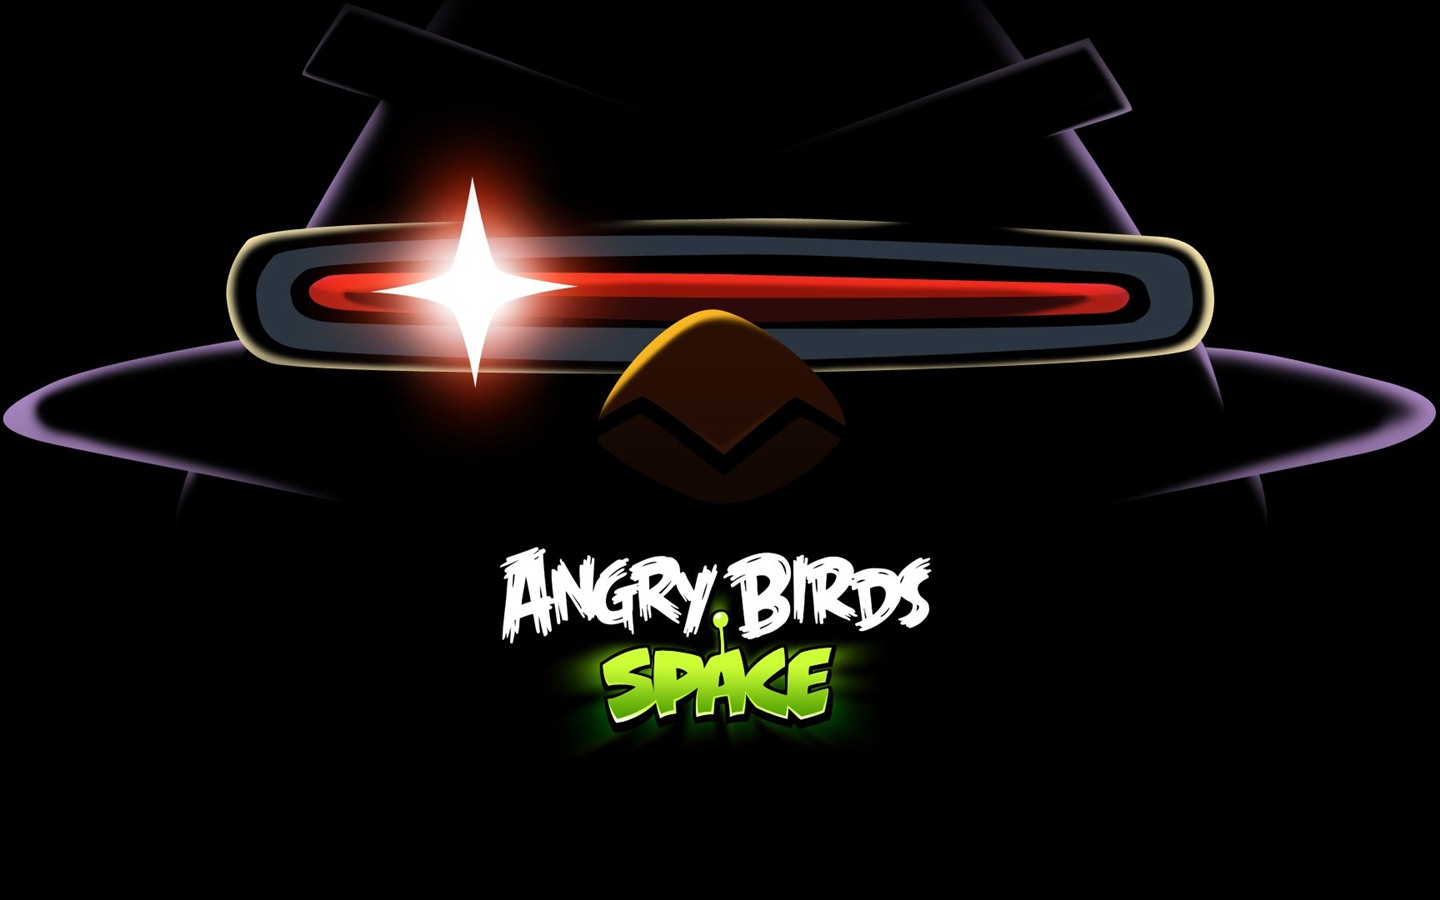 Angry Birds Spiel wallpapers #22 - 1440x900